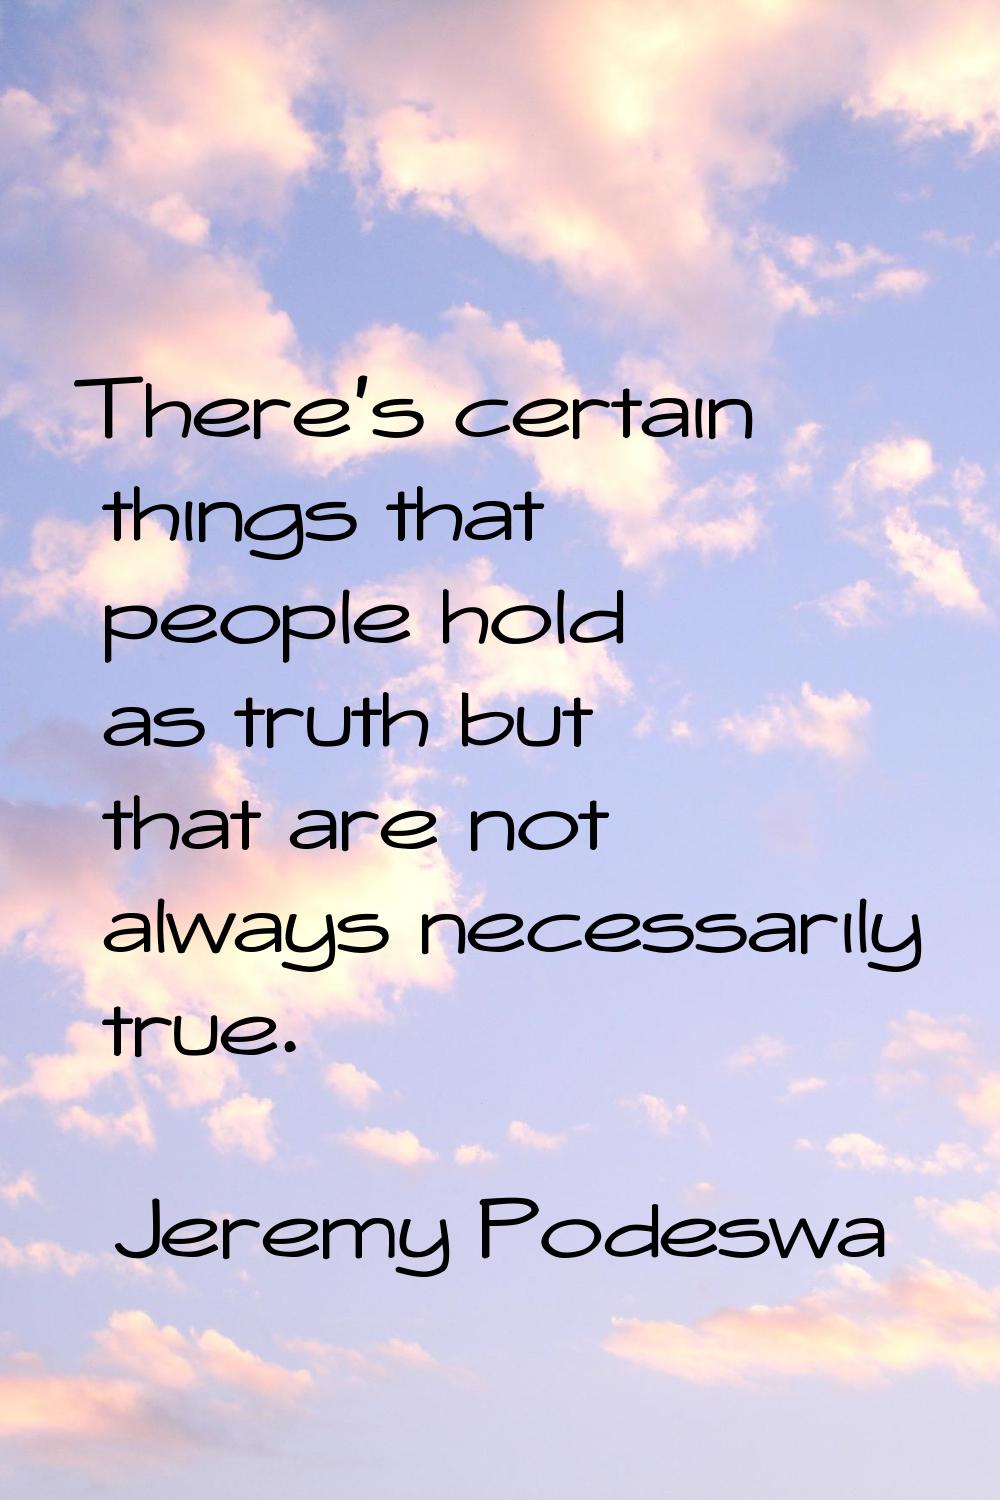 There's certain things that people hold as truth but that are not always necessarily true.